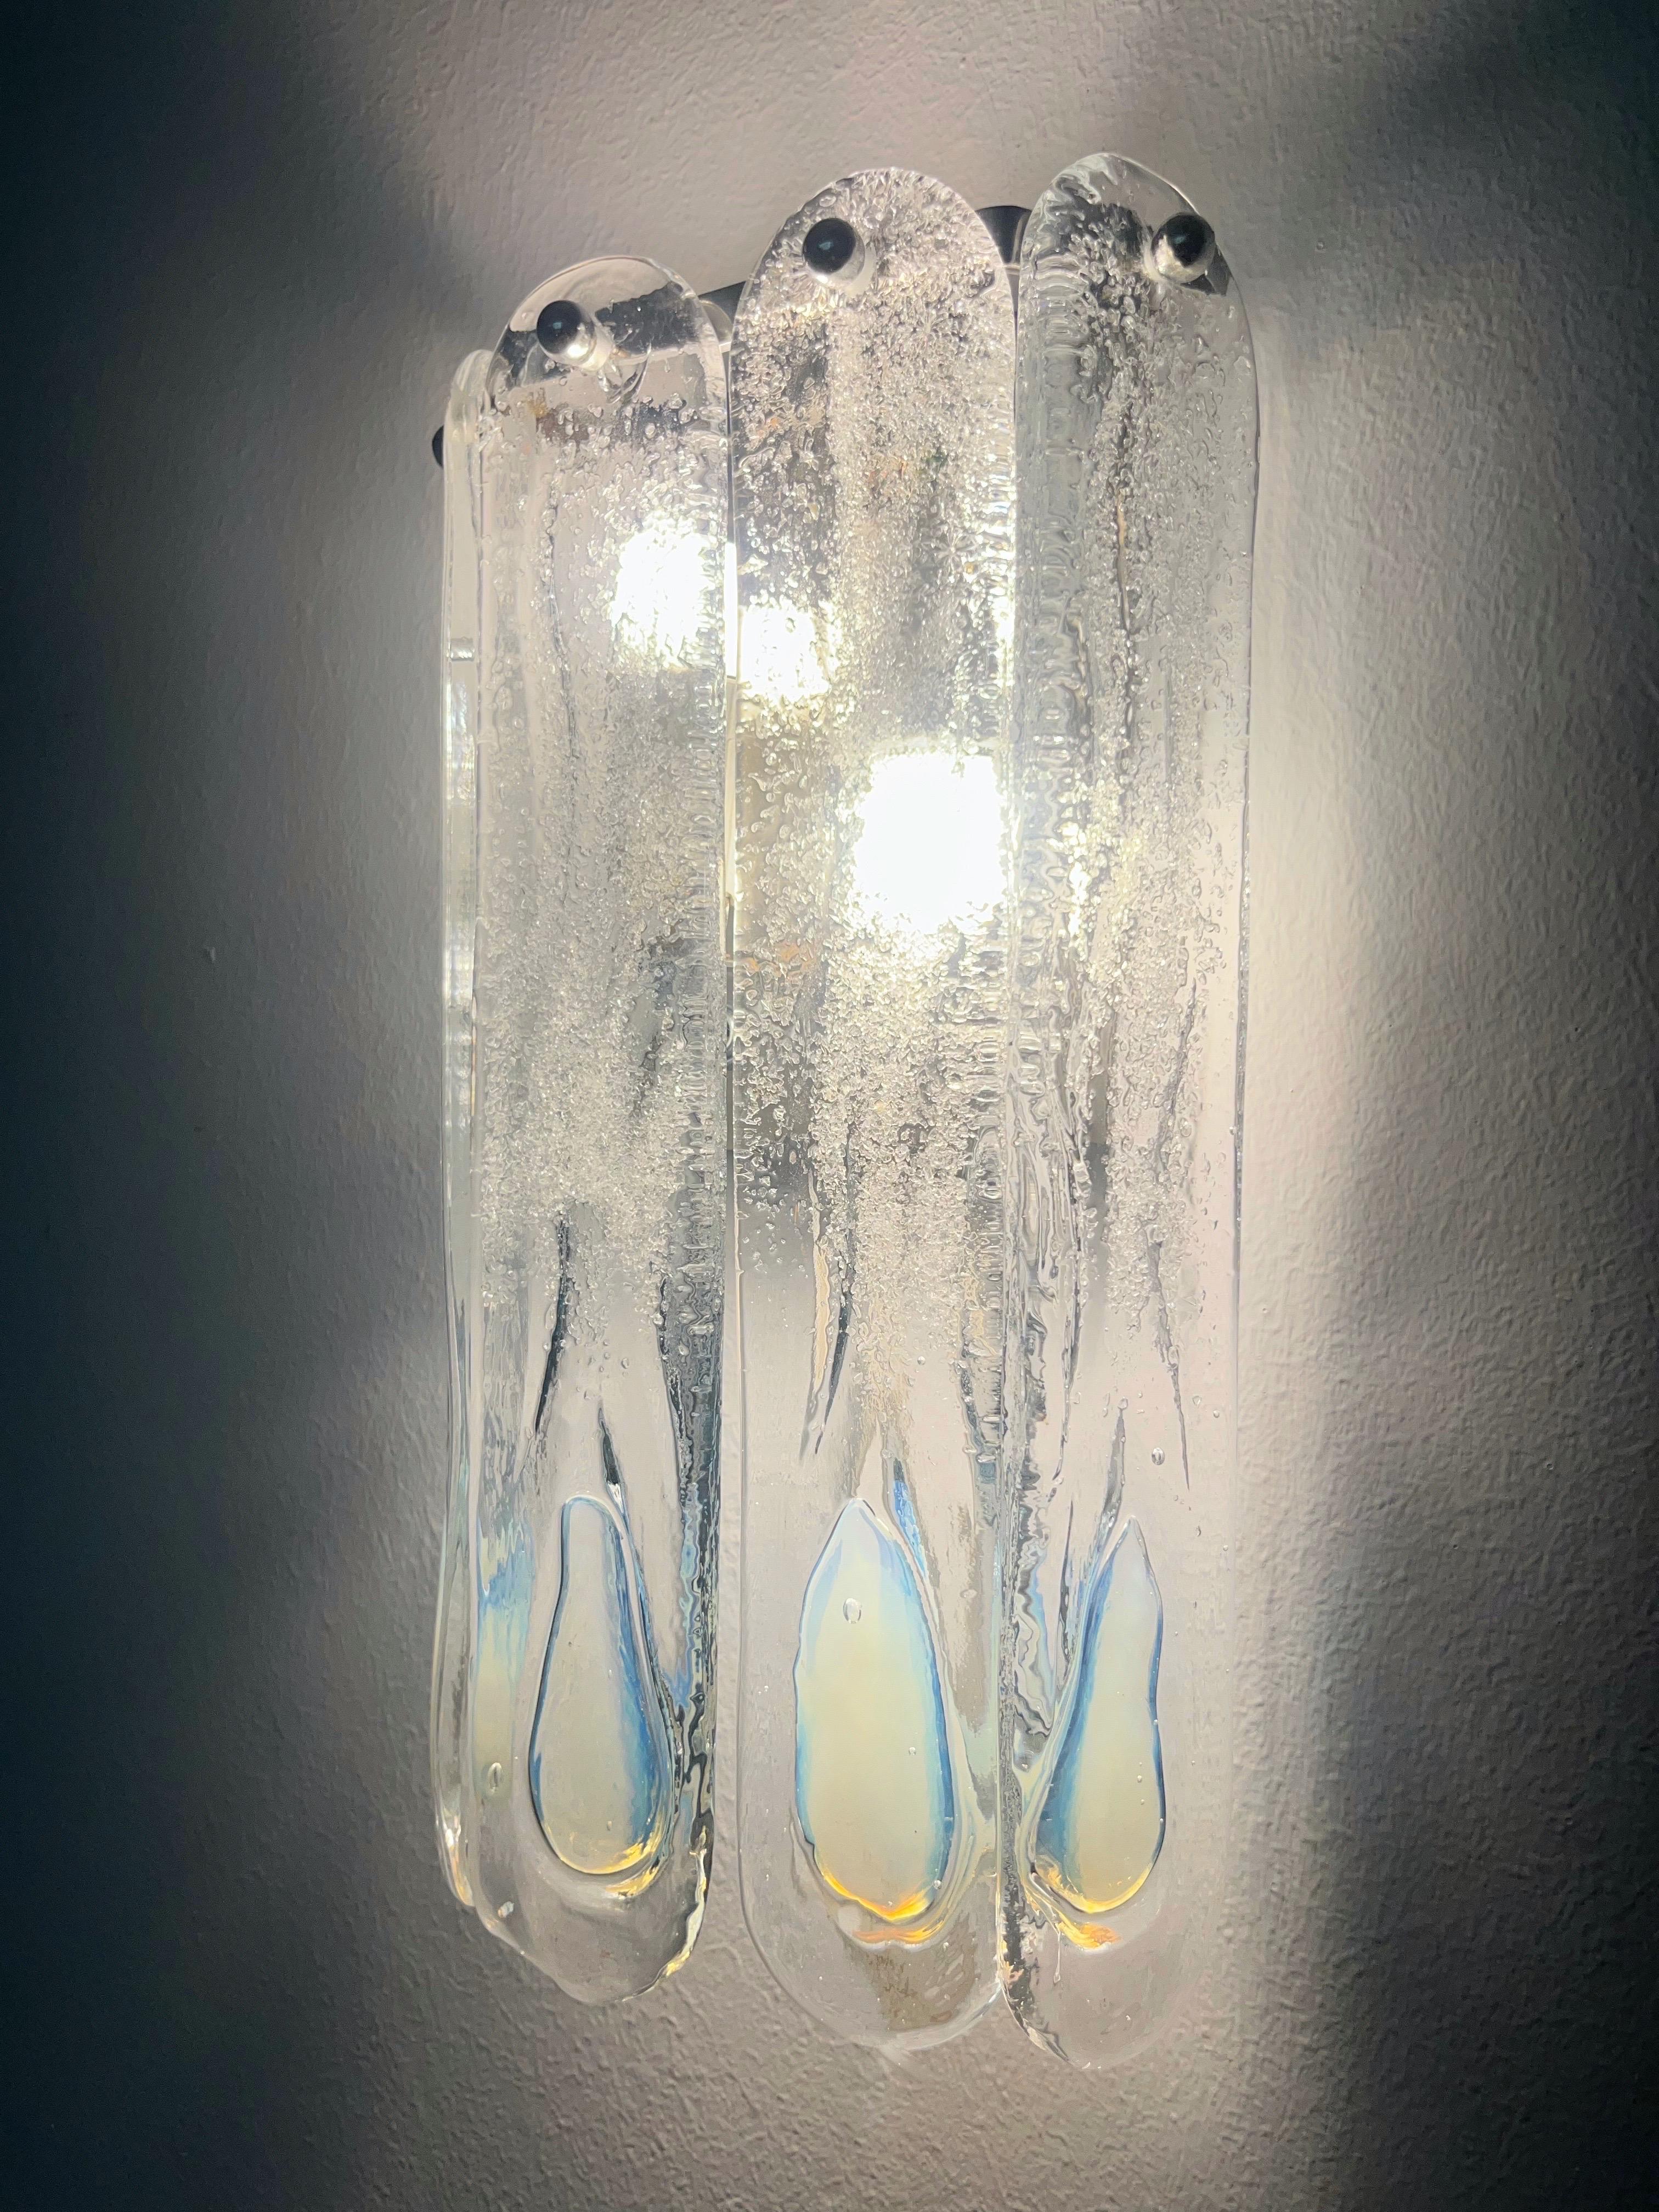 Italian Midcentury Set of Three Iridescent White Wall Sconces by Mazzega, 1970s For Sale 3